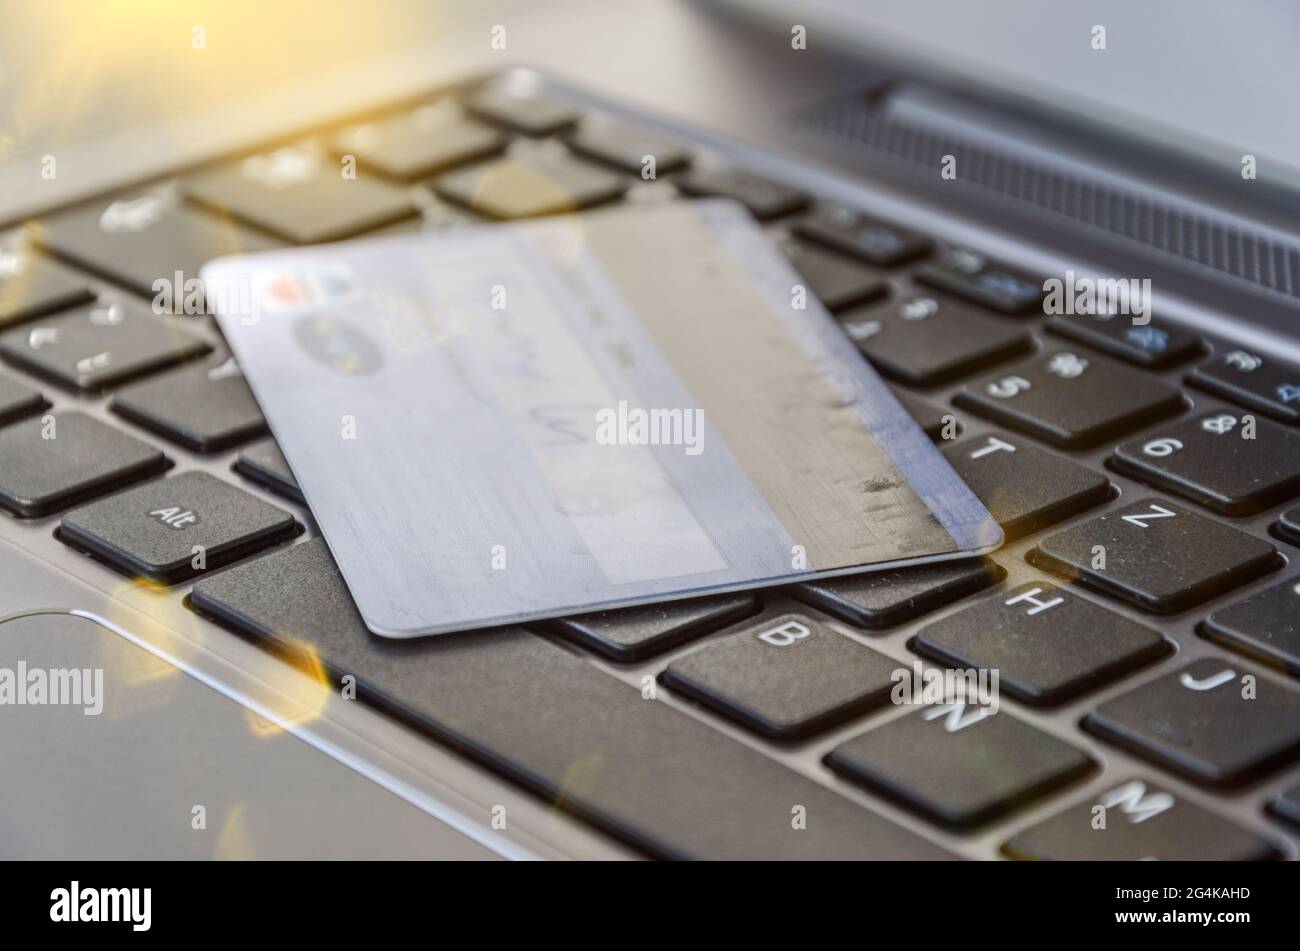 Credit card on computer keyboard symbolising online banking or shopping Stock Photo